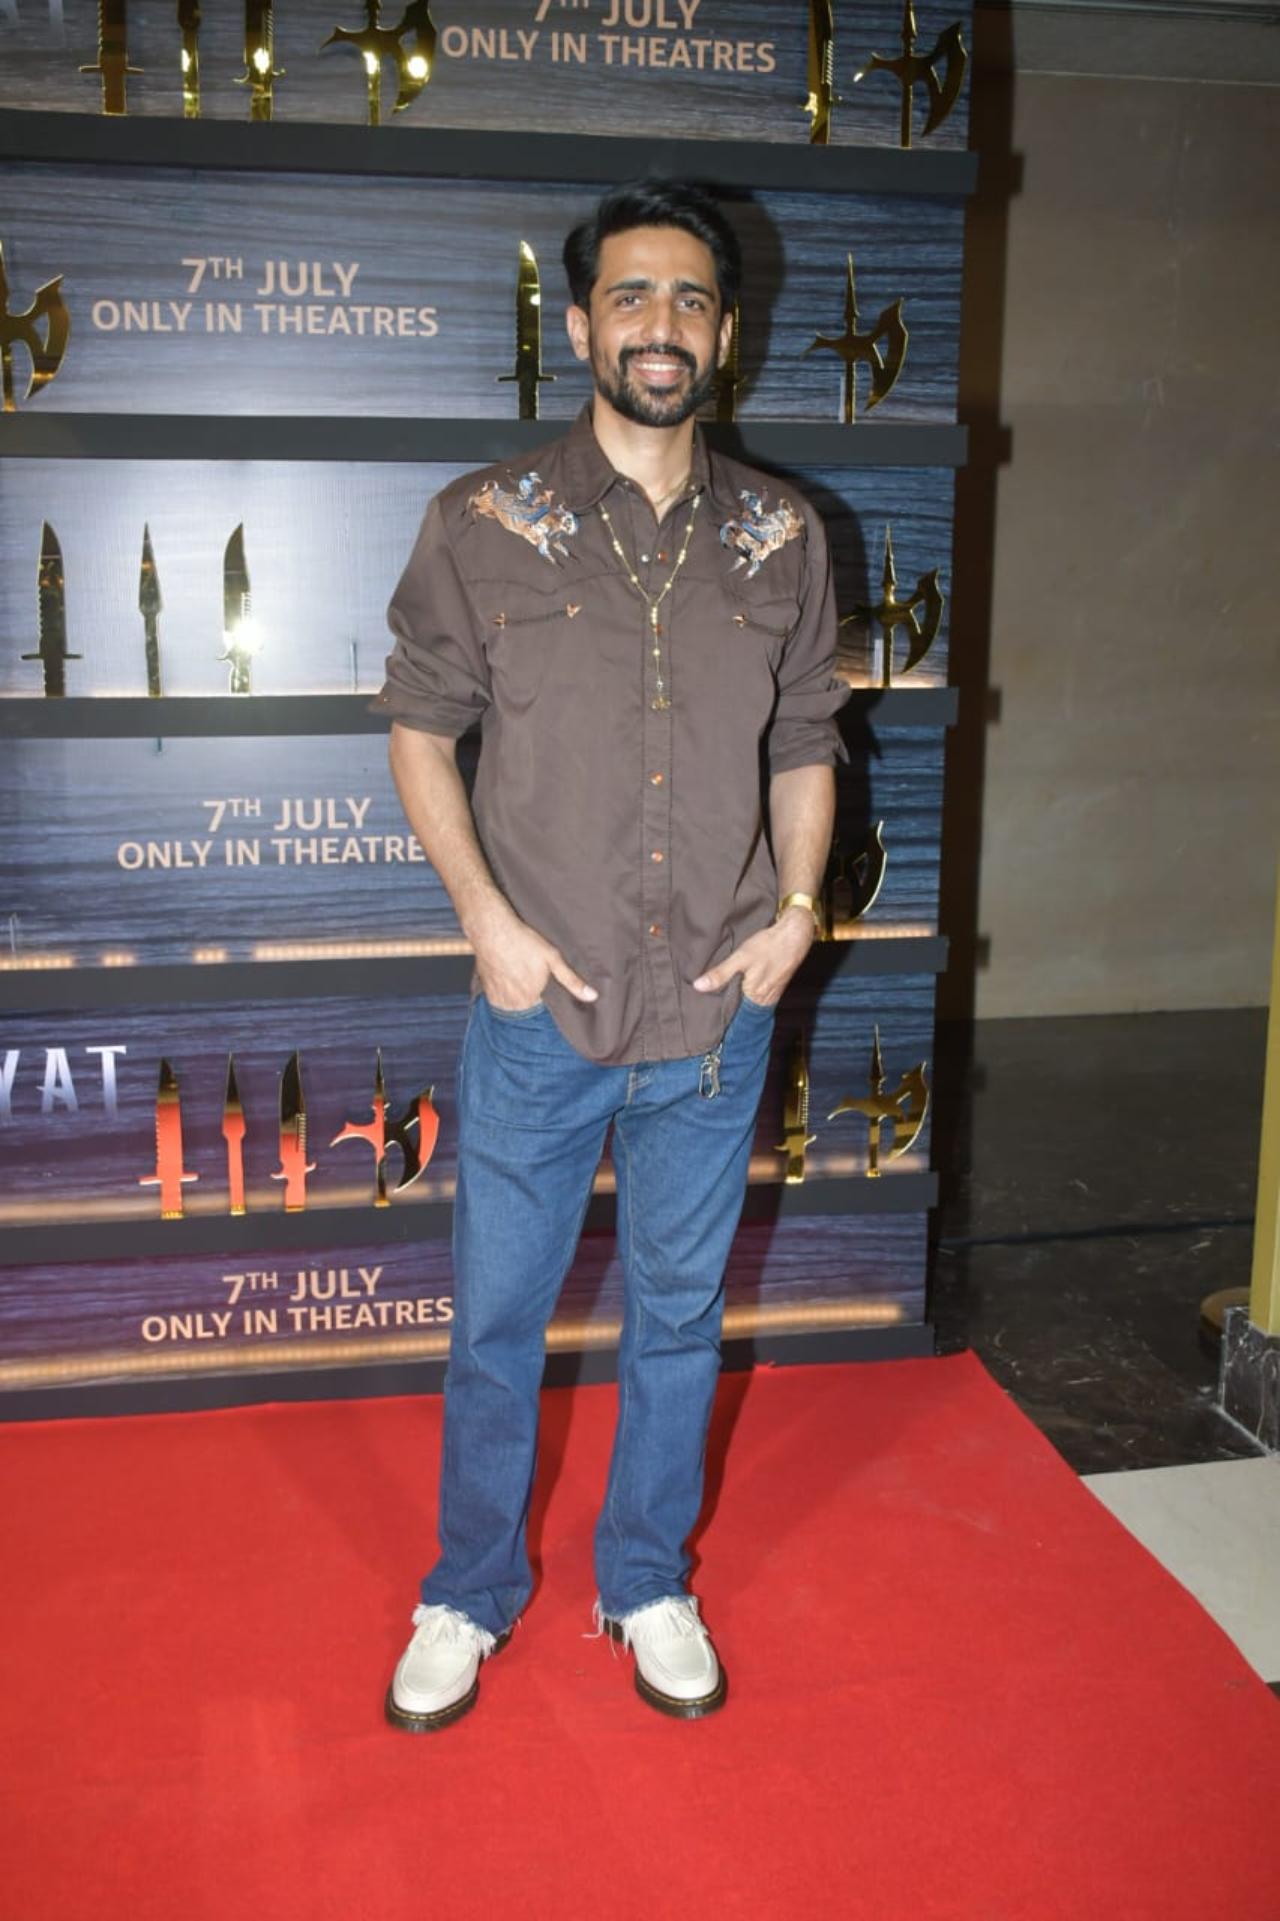 Gulshan Devaiah was all smiles as he arrived for the screening in a brown shirt and denims. The actor is currently basking in the success of his recently released series 'Dahaad'